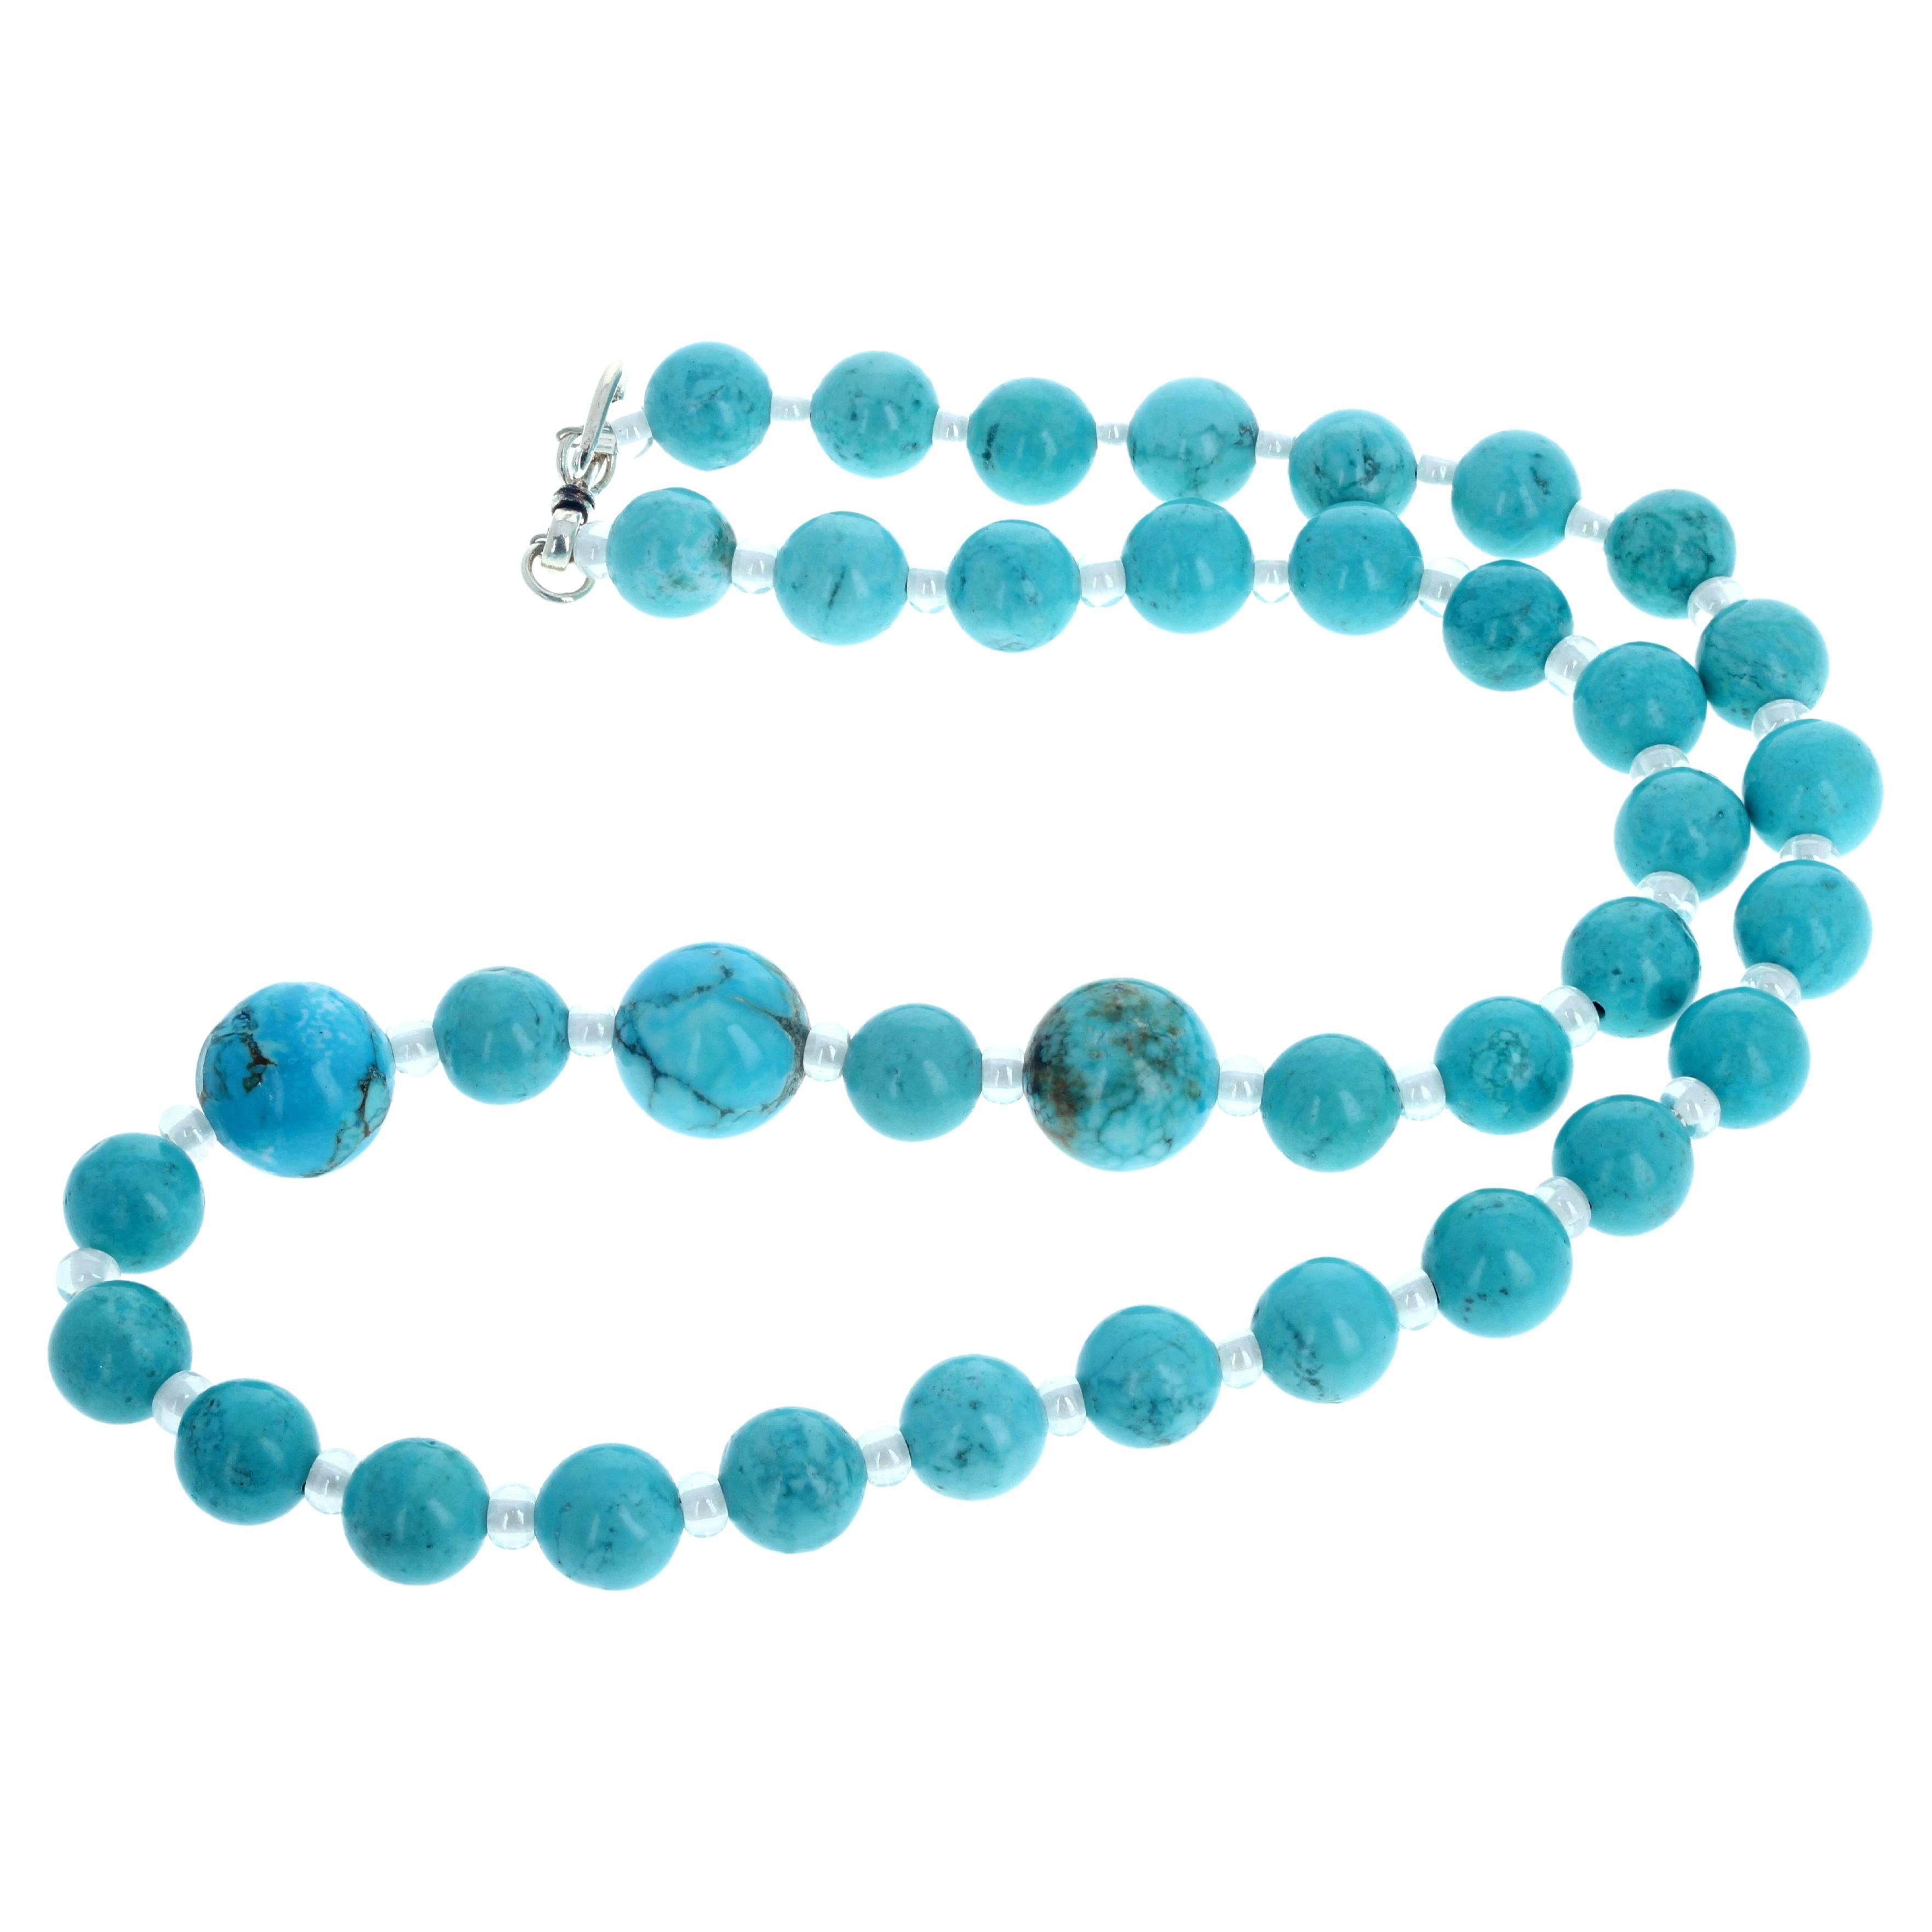 This lovely exquisite elegantly glamorous natural Blue Magnesite highly polished necklace is 20 1/2 inches long and set dramatically.  The three largest Magnesites are approximately 14mm.  The sparkling little enhancers are silvery chrystally